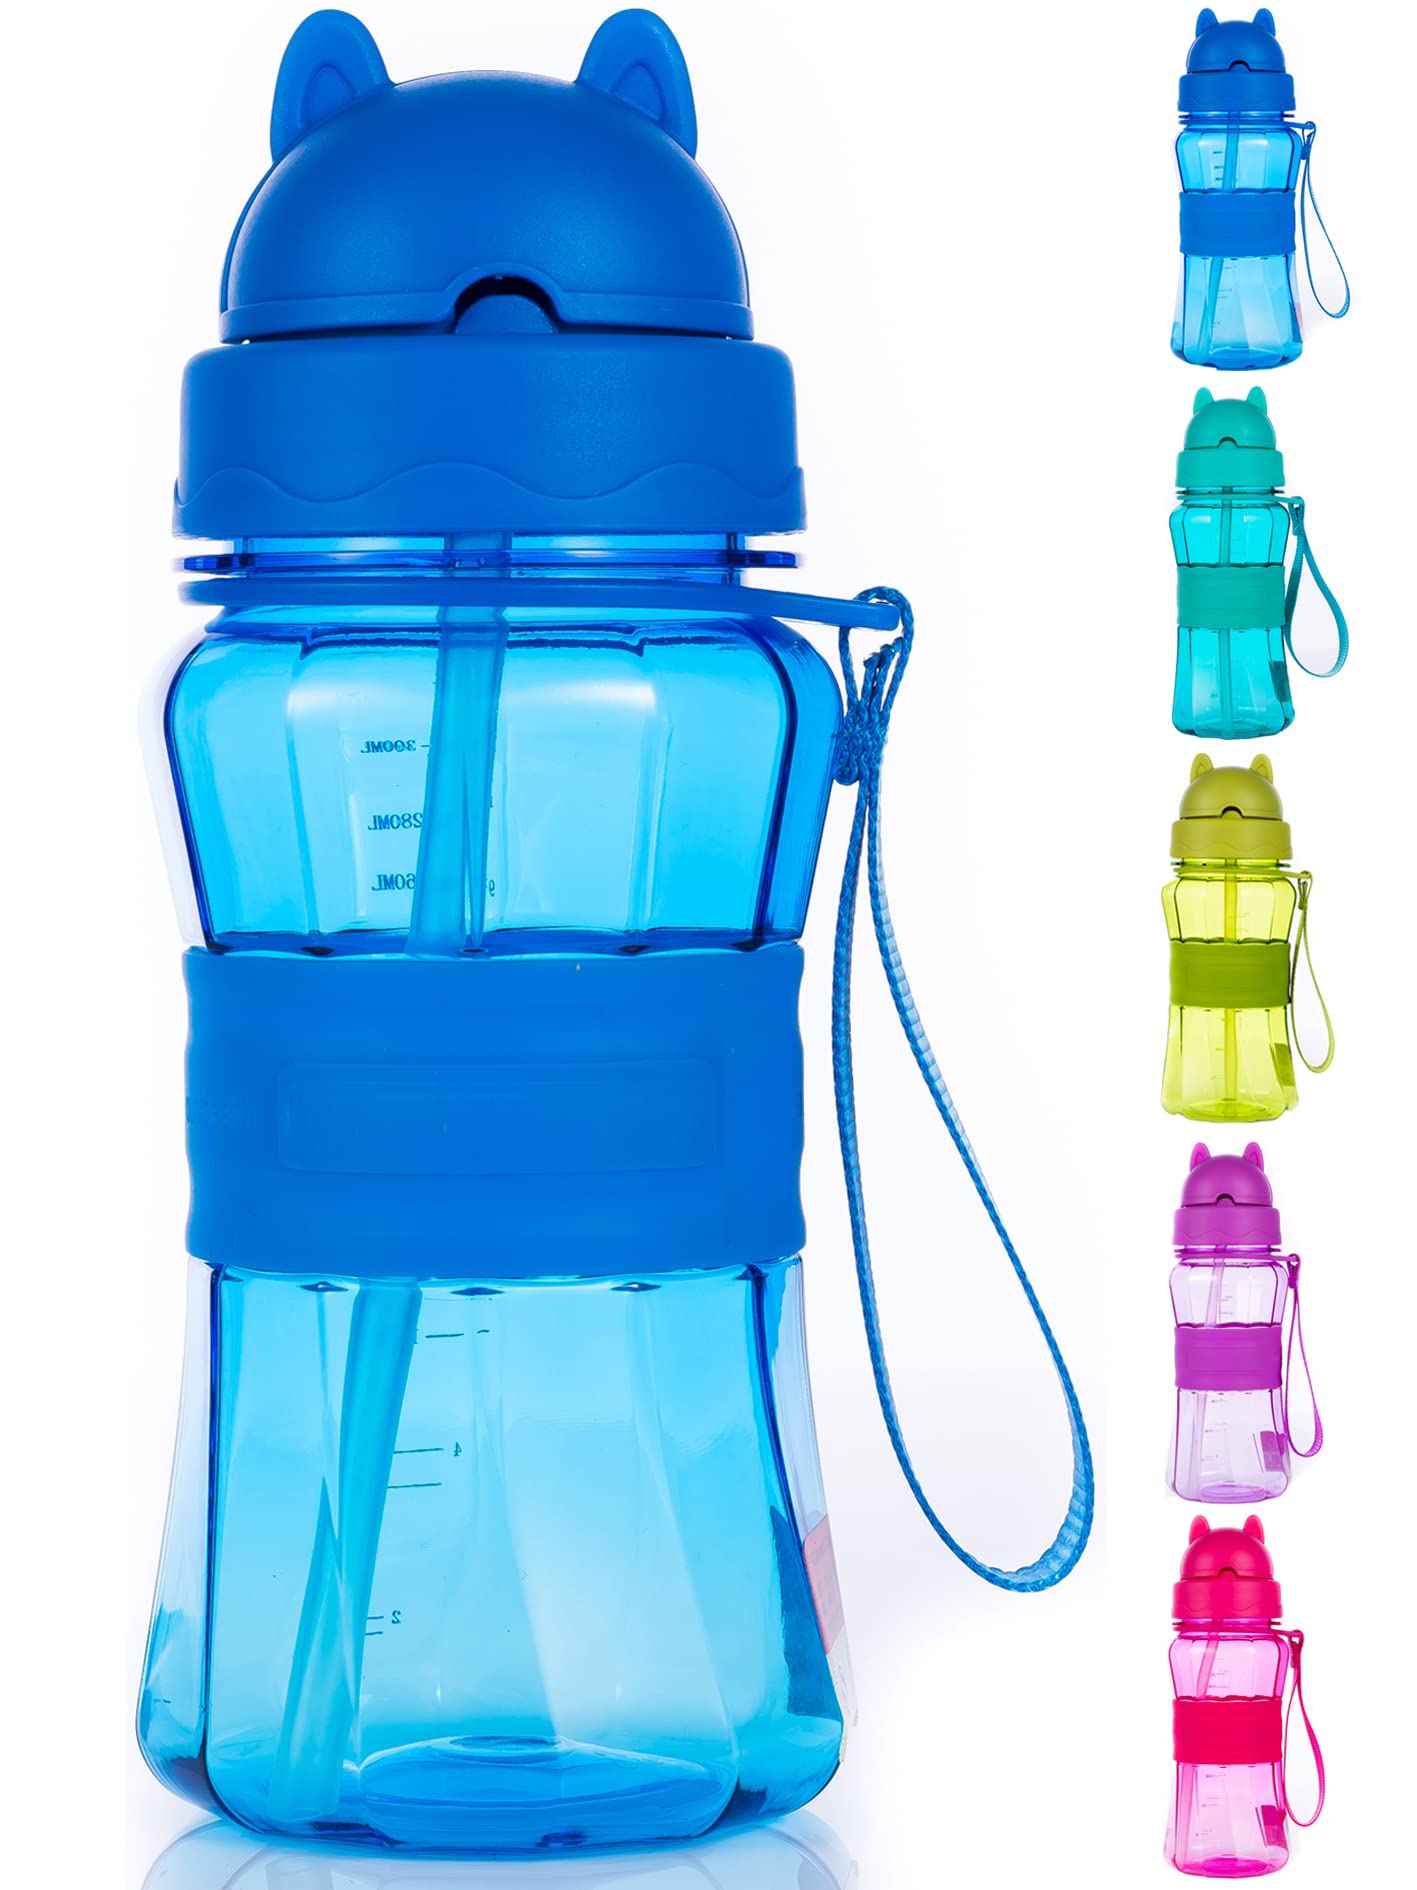 Ecteco Water Bottle for Kids Toddlers with Straw Strap 12OZ